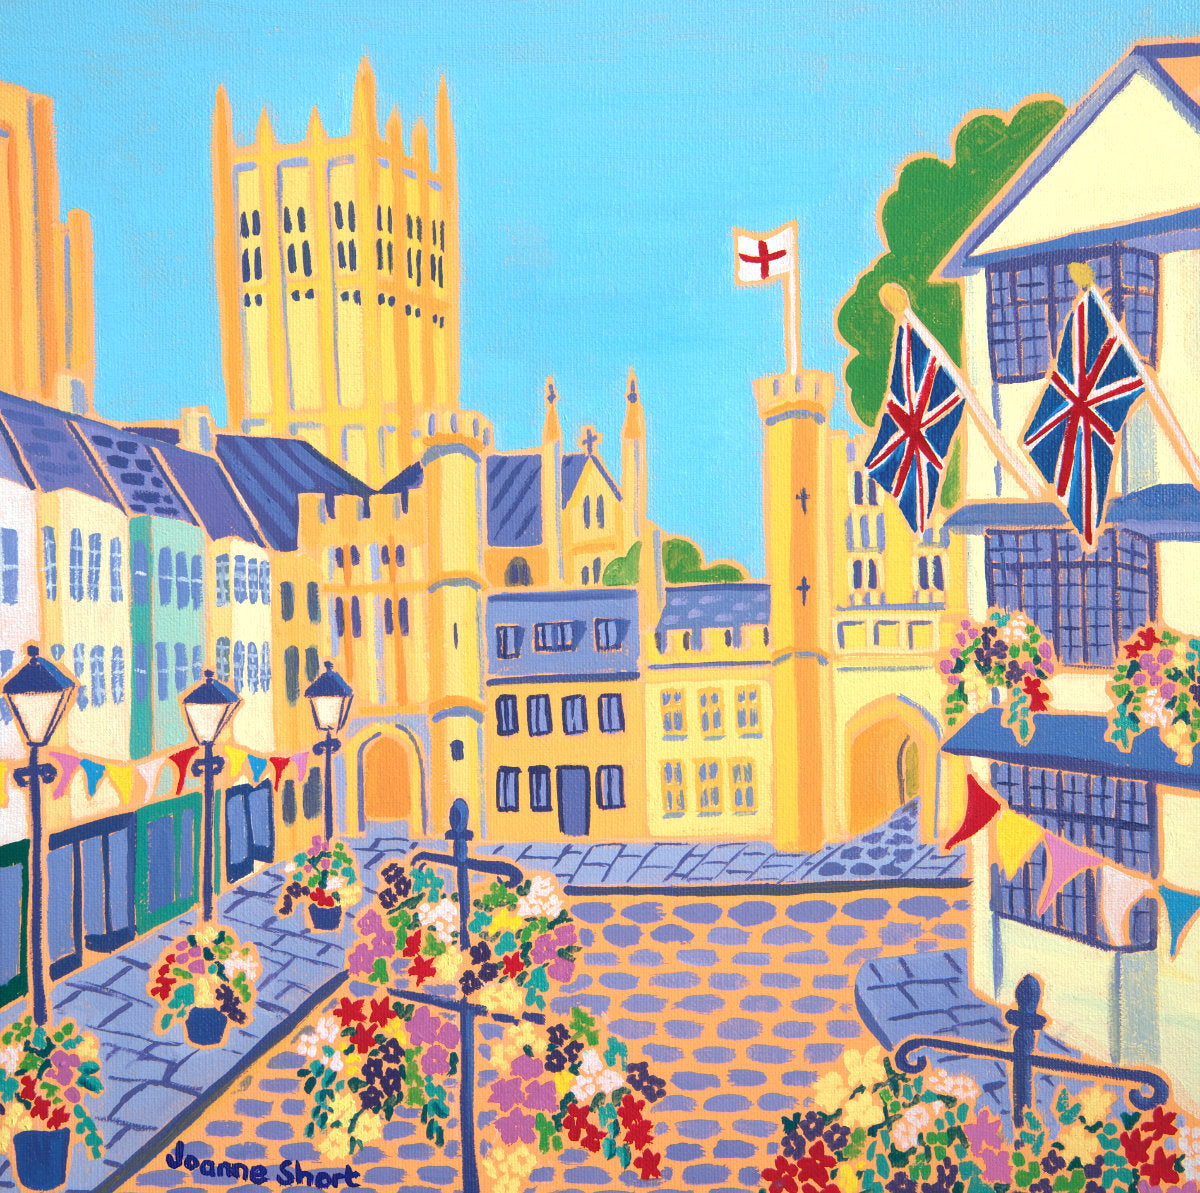 'Hanging Baskets, Bunting and Flags, Market Square, Wells'. 12 x 12 inches original art oil on canvas. Paintings of Somerset by Cornish Artist Joanne Short from our Cornwall Art Gallery